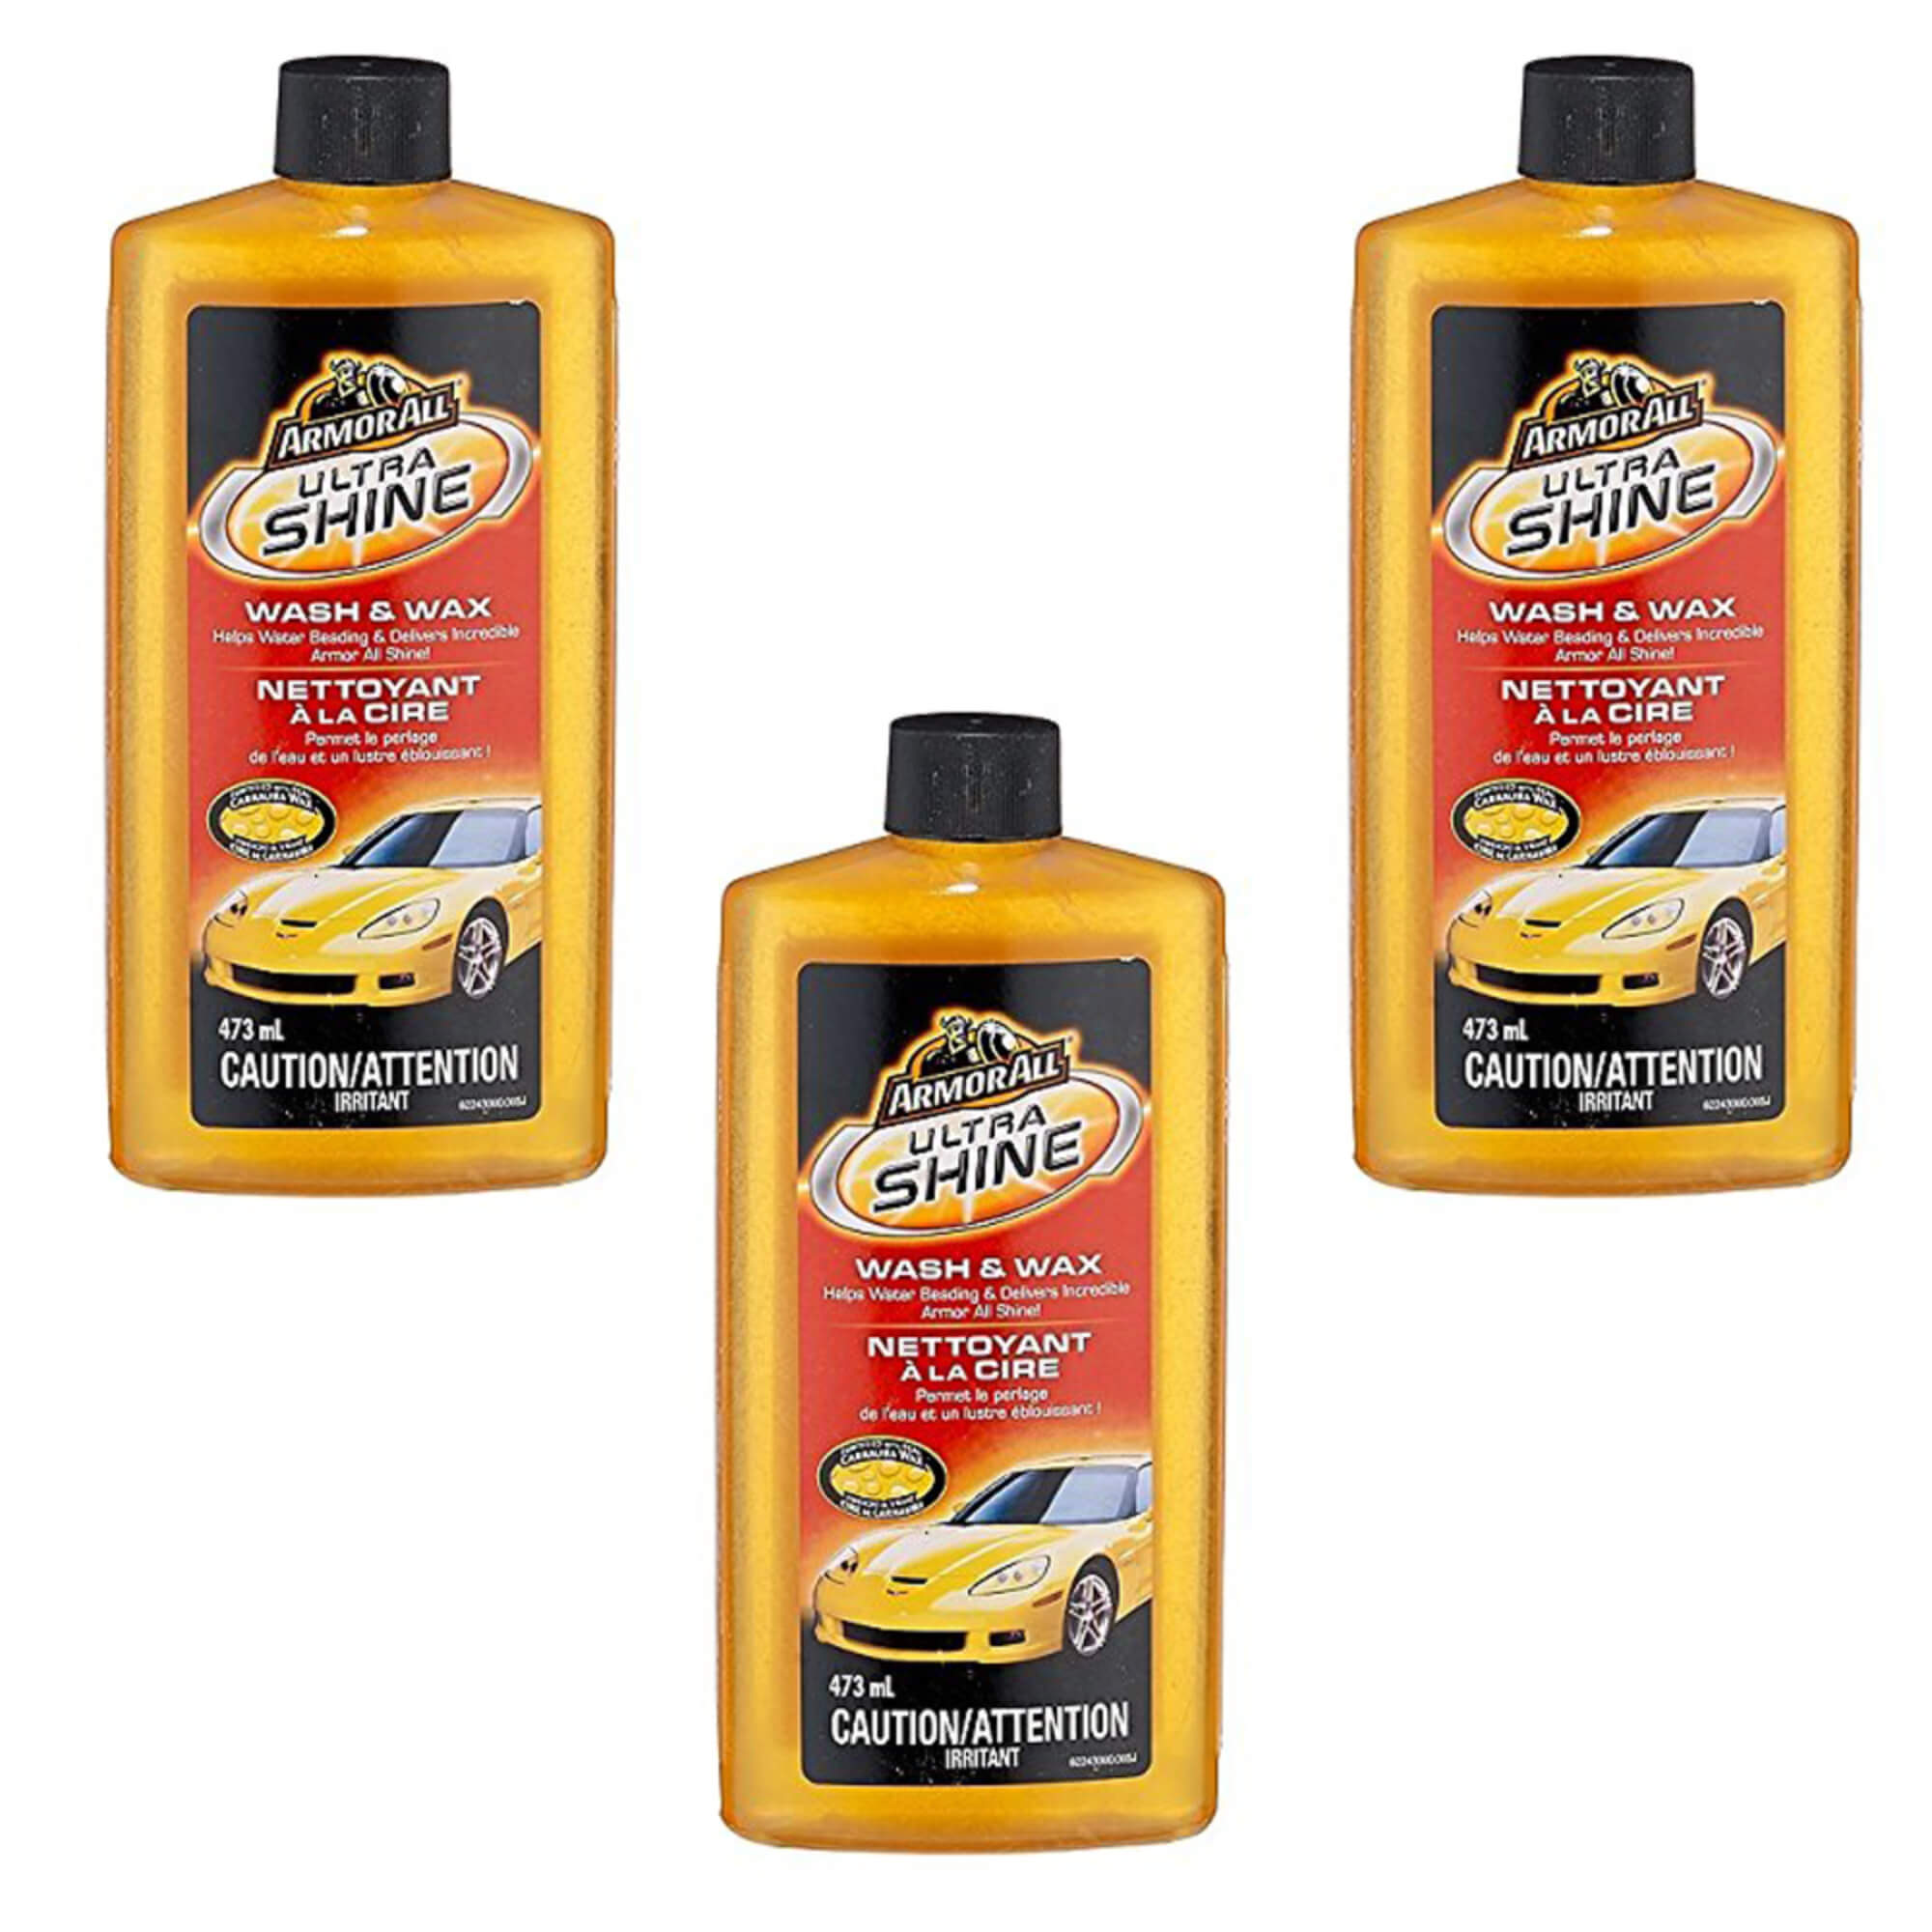 Armor All 17741 Ultra Shine Wash and Wax, 473mL (Pack of 3)